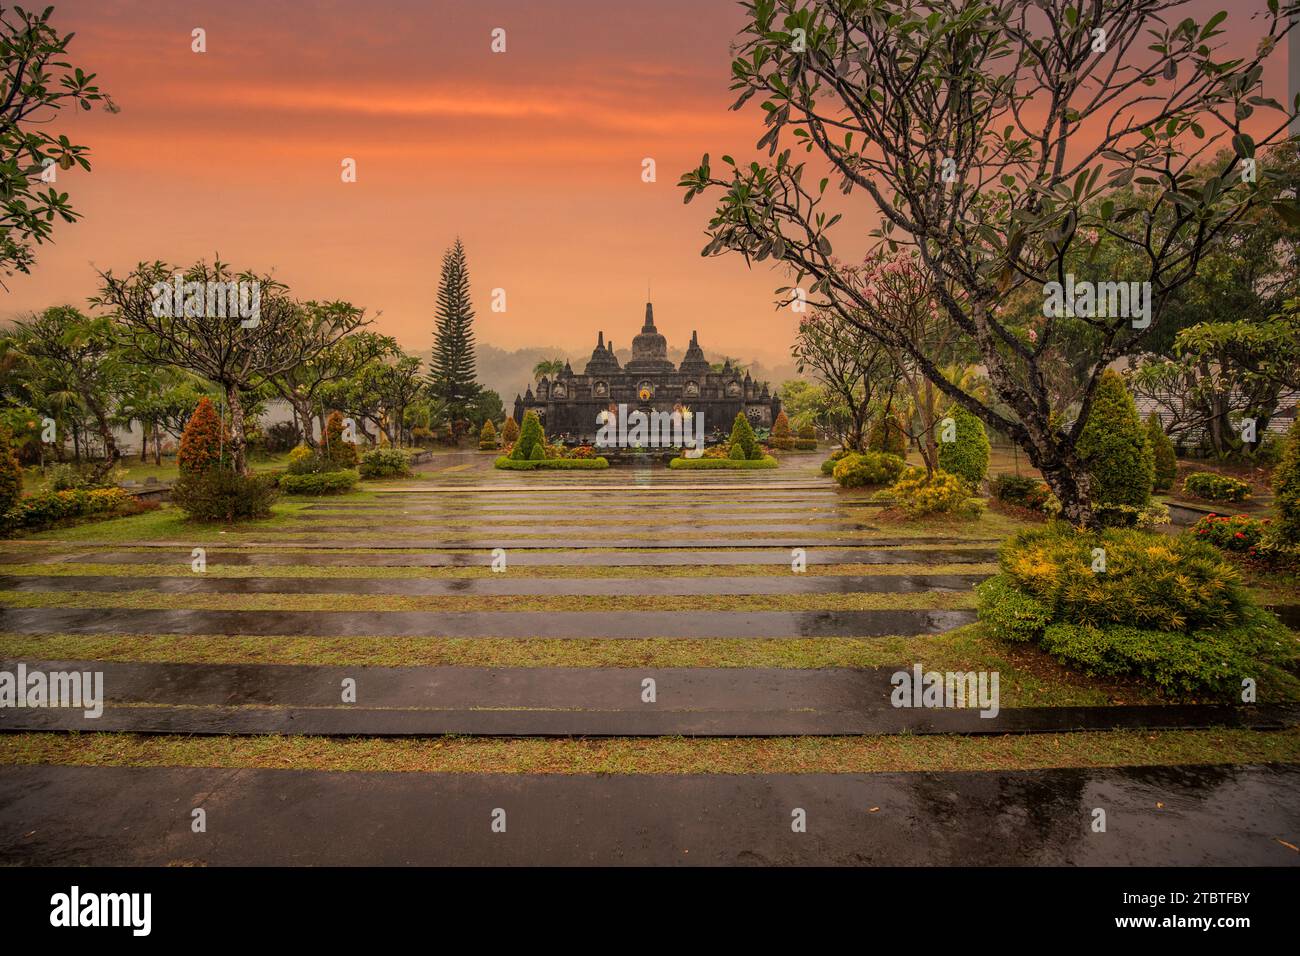 A Buddhist temple in the evening in the rain, the Brahmavihara-Arama temple has beautiful gardens and is also home to a monastery, tropical plants near Banjar, Bali Stock Photo